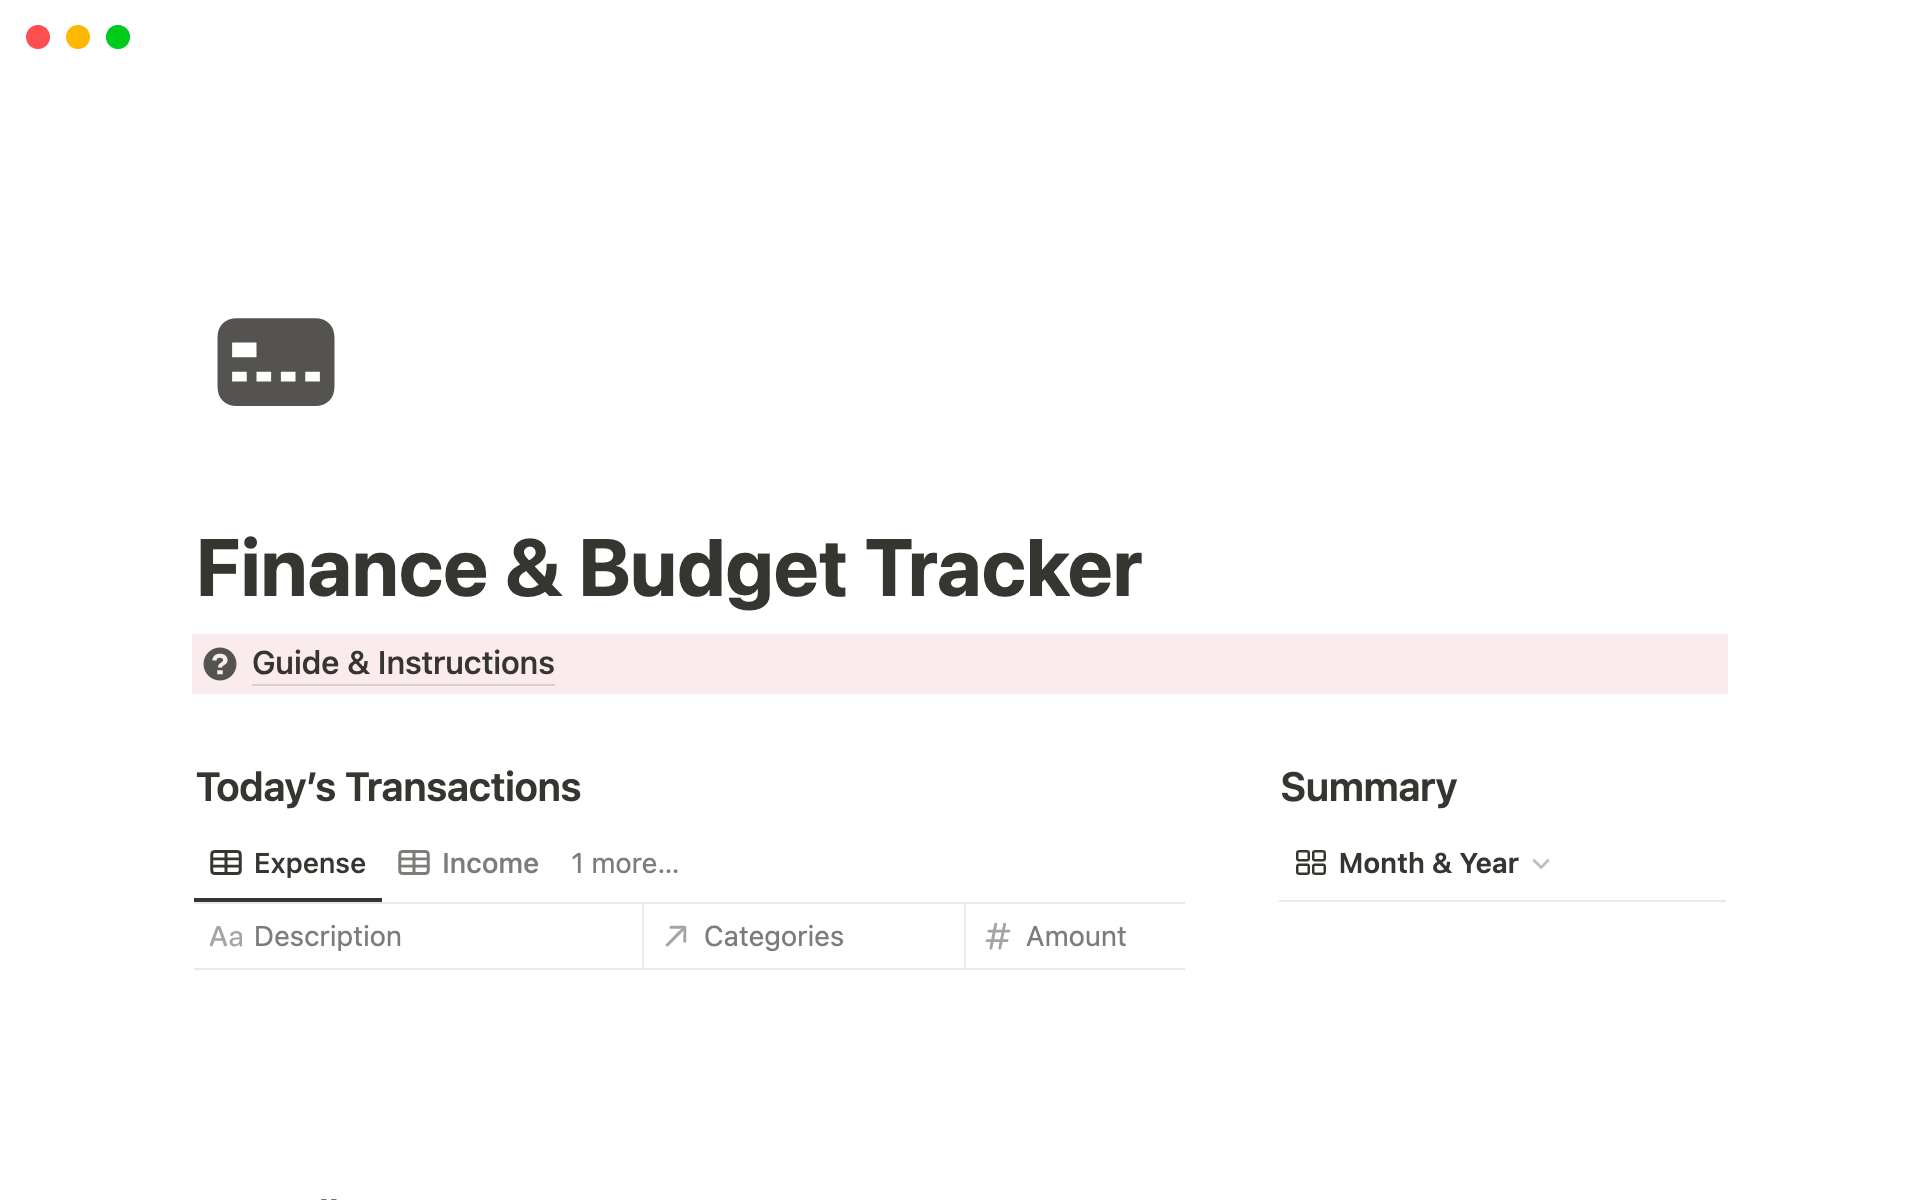 This template will help you effectively manage, track, and organize your finances, budgets, and subscriptions